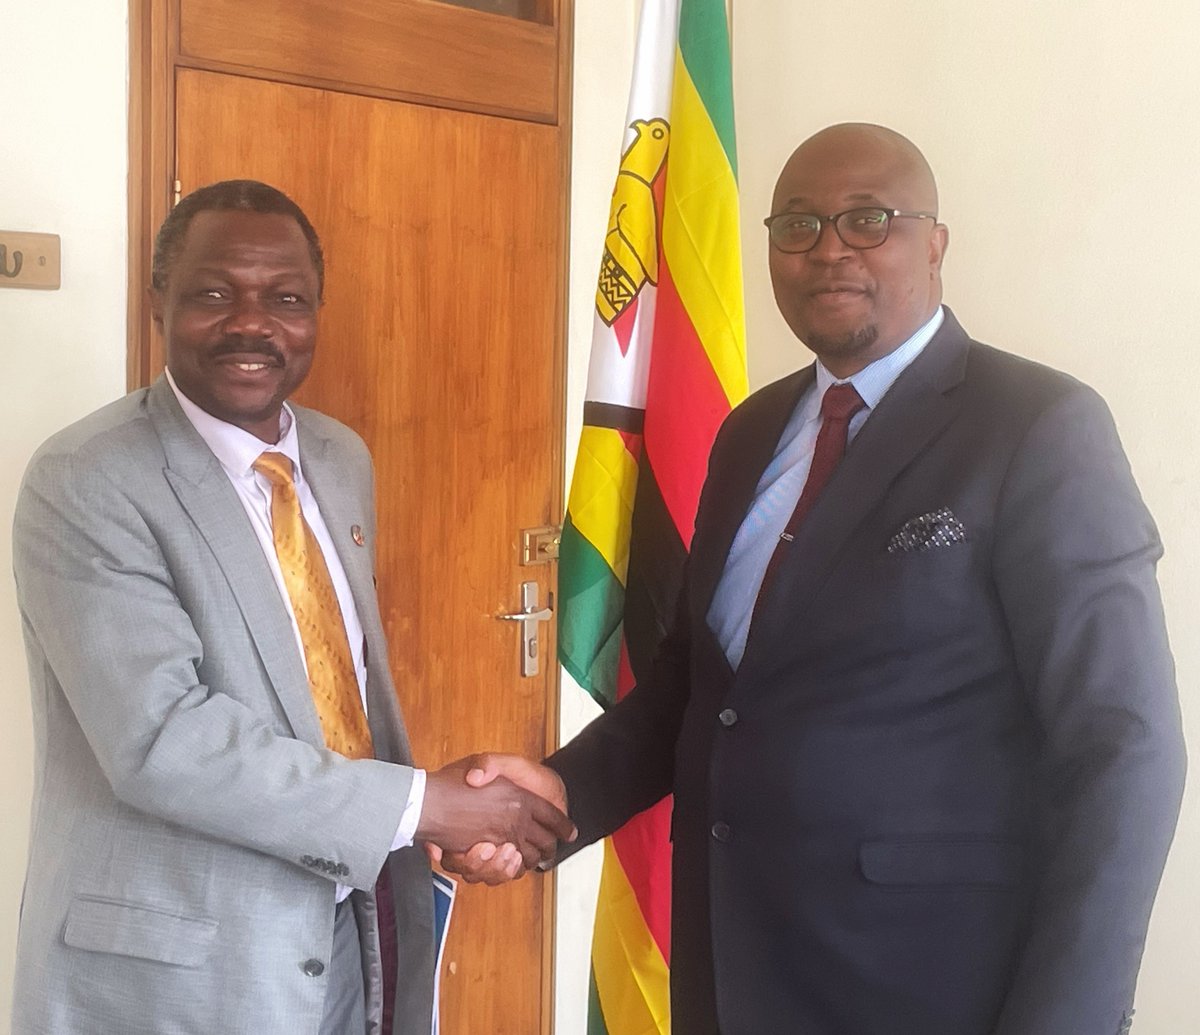 Productive courtesy call between @Ayoodusola and Permanent Secretary for Presidential Affairs Eng @TMuguti at @PresAffairsZW, discussing priorities of devolution, an area UNDP Zimbabwe is happy to partner. Sincerest thanks for such an outstanding discussion.